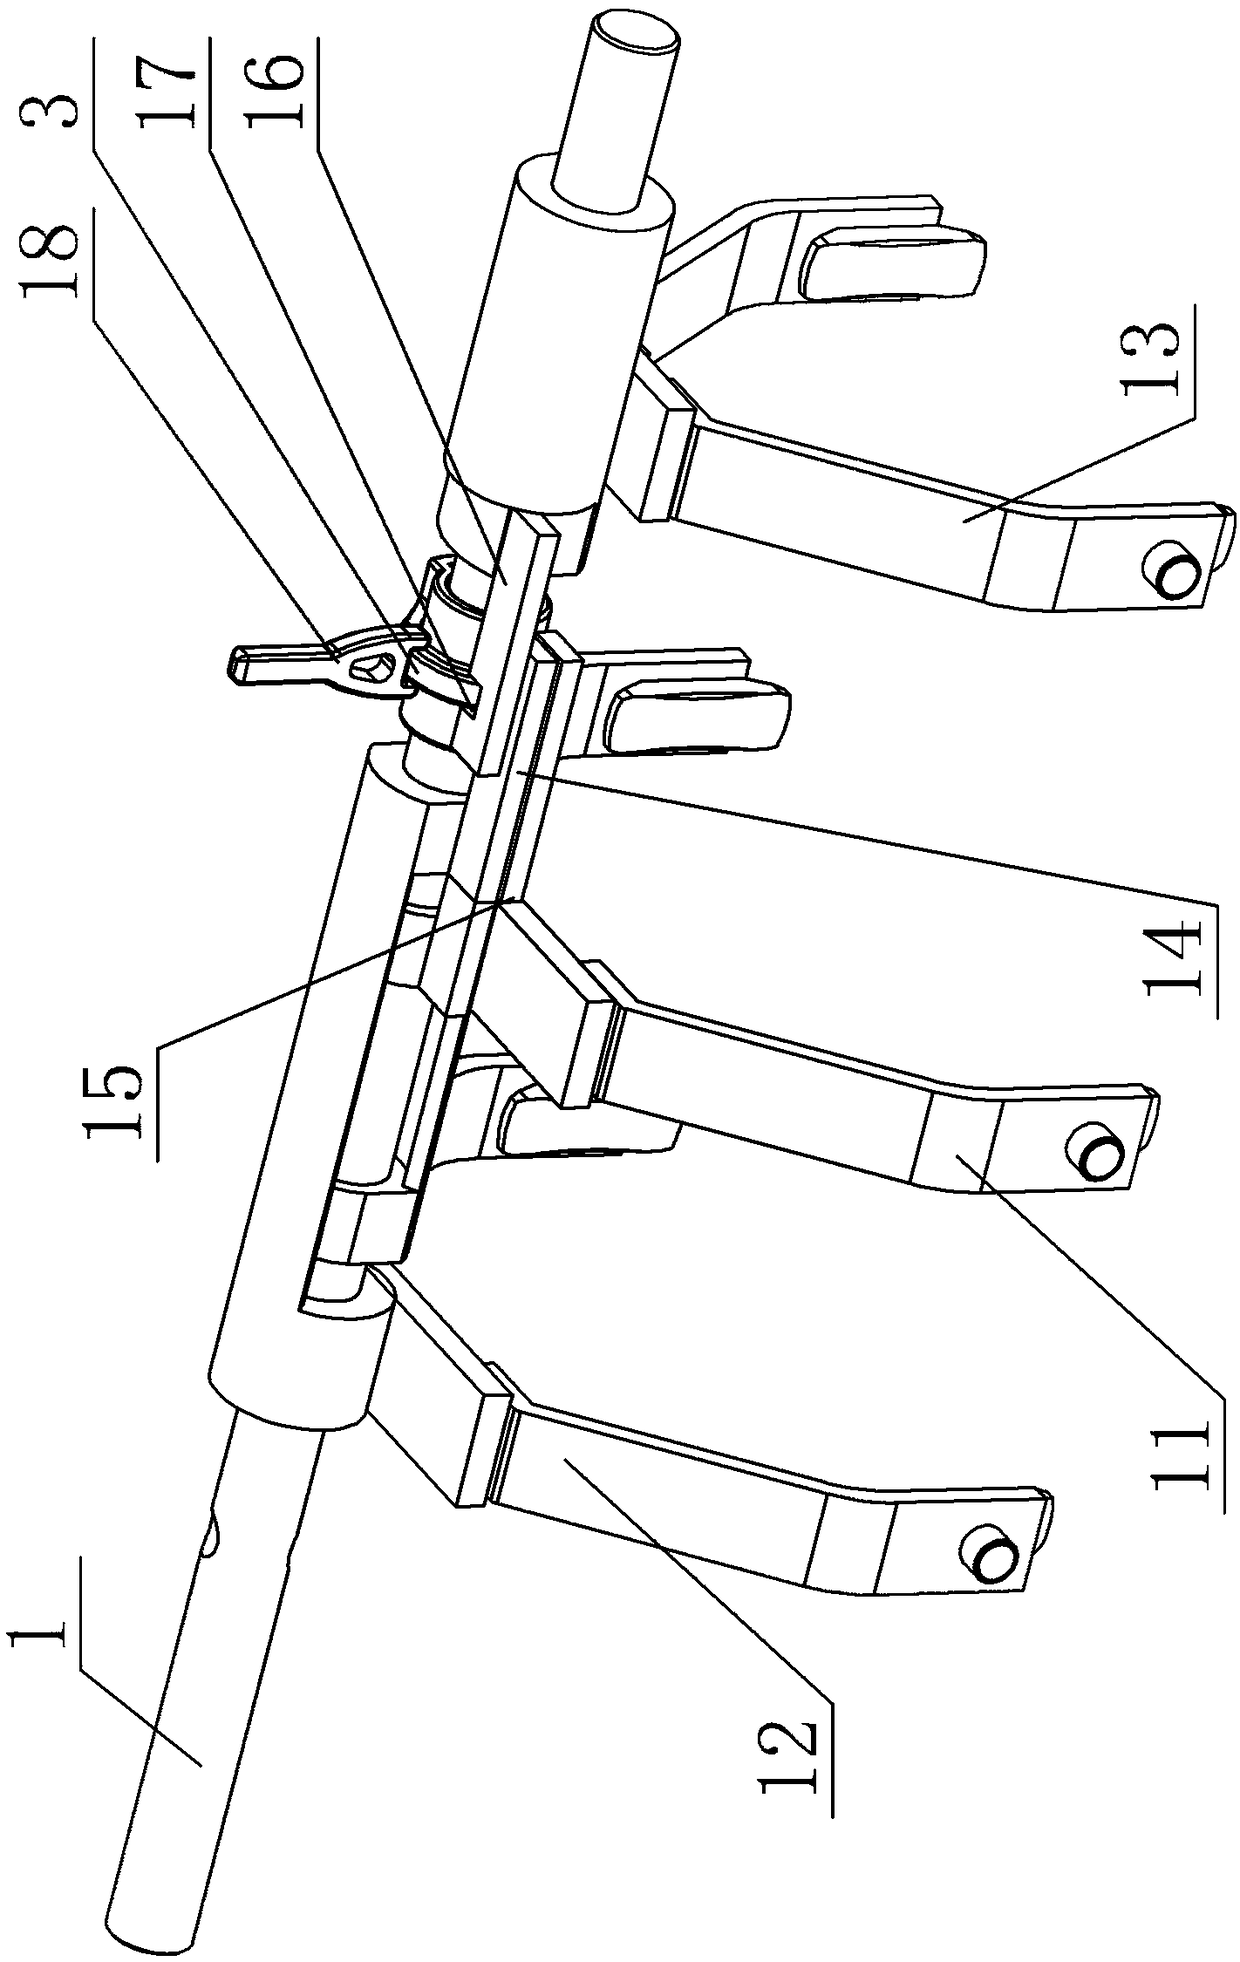 Control structure of a shifting fork